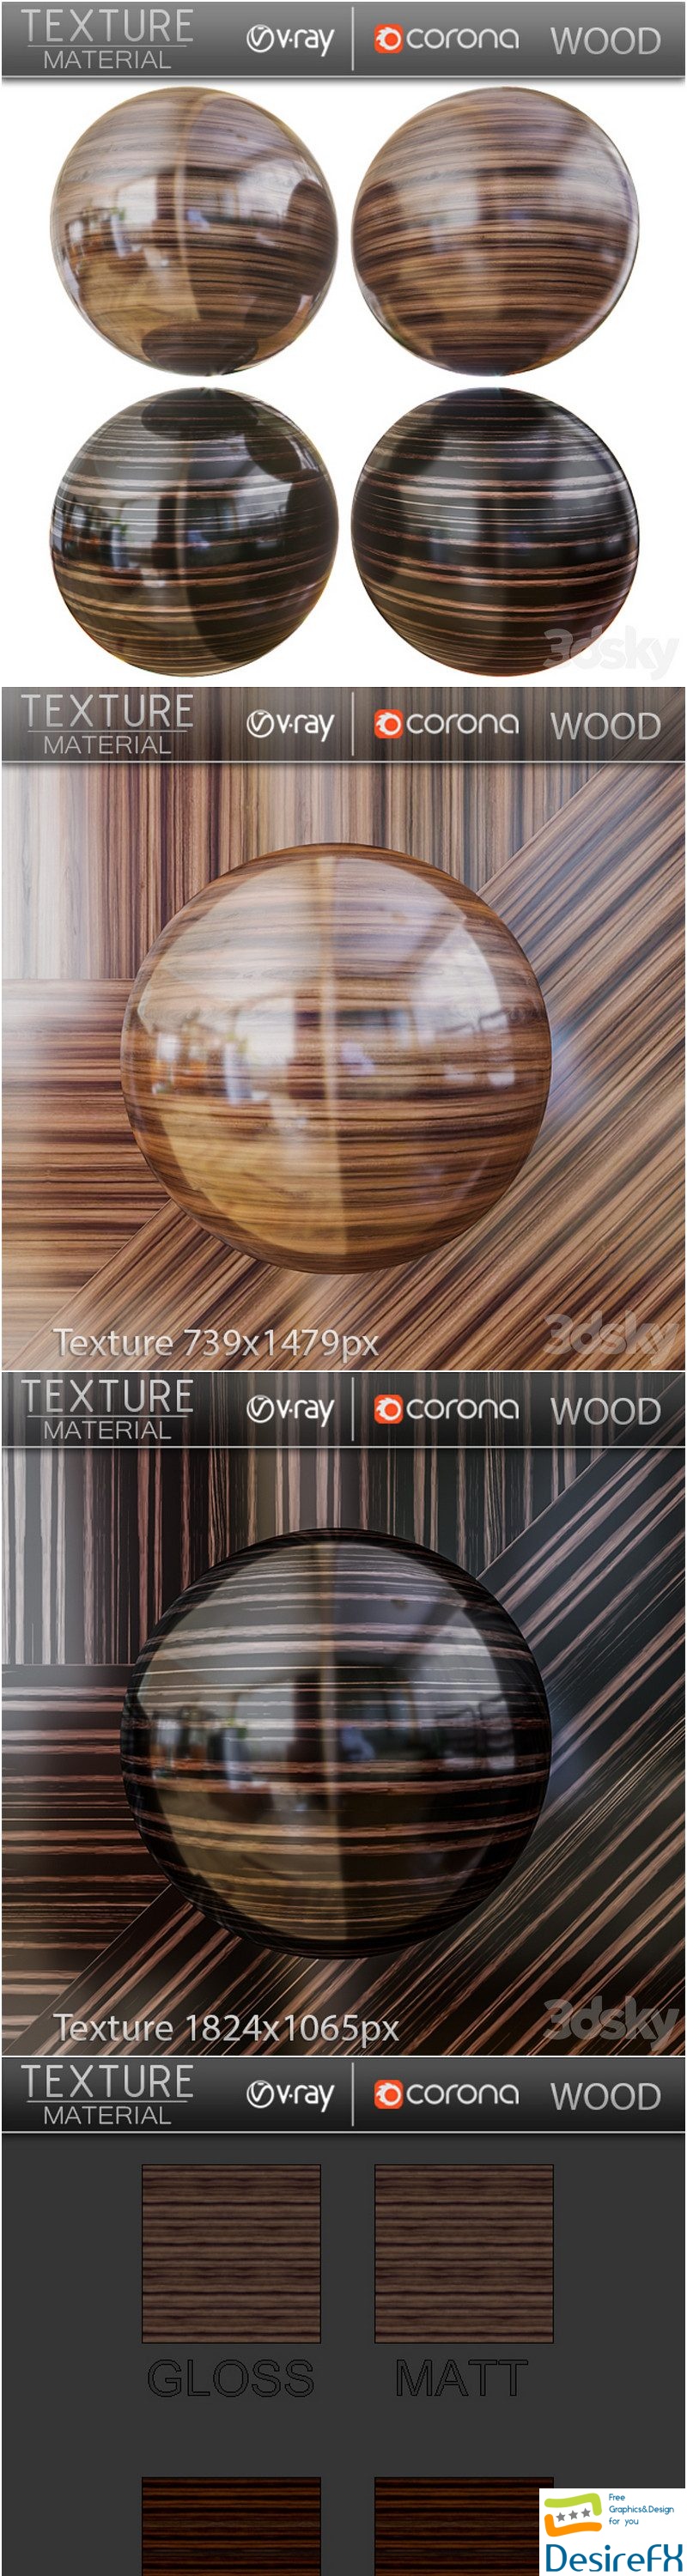 Wood Material and Textures collection vol. 01 01 3D Model